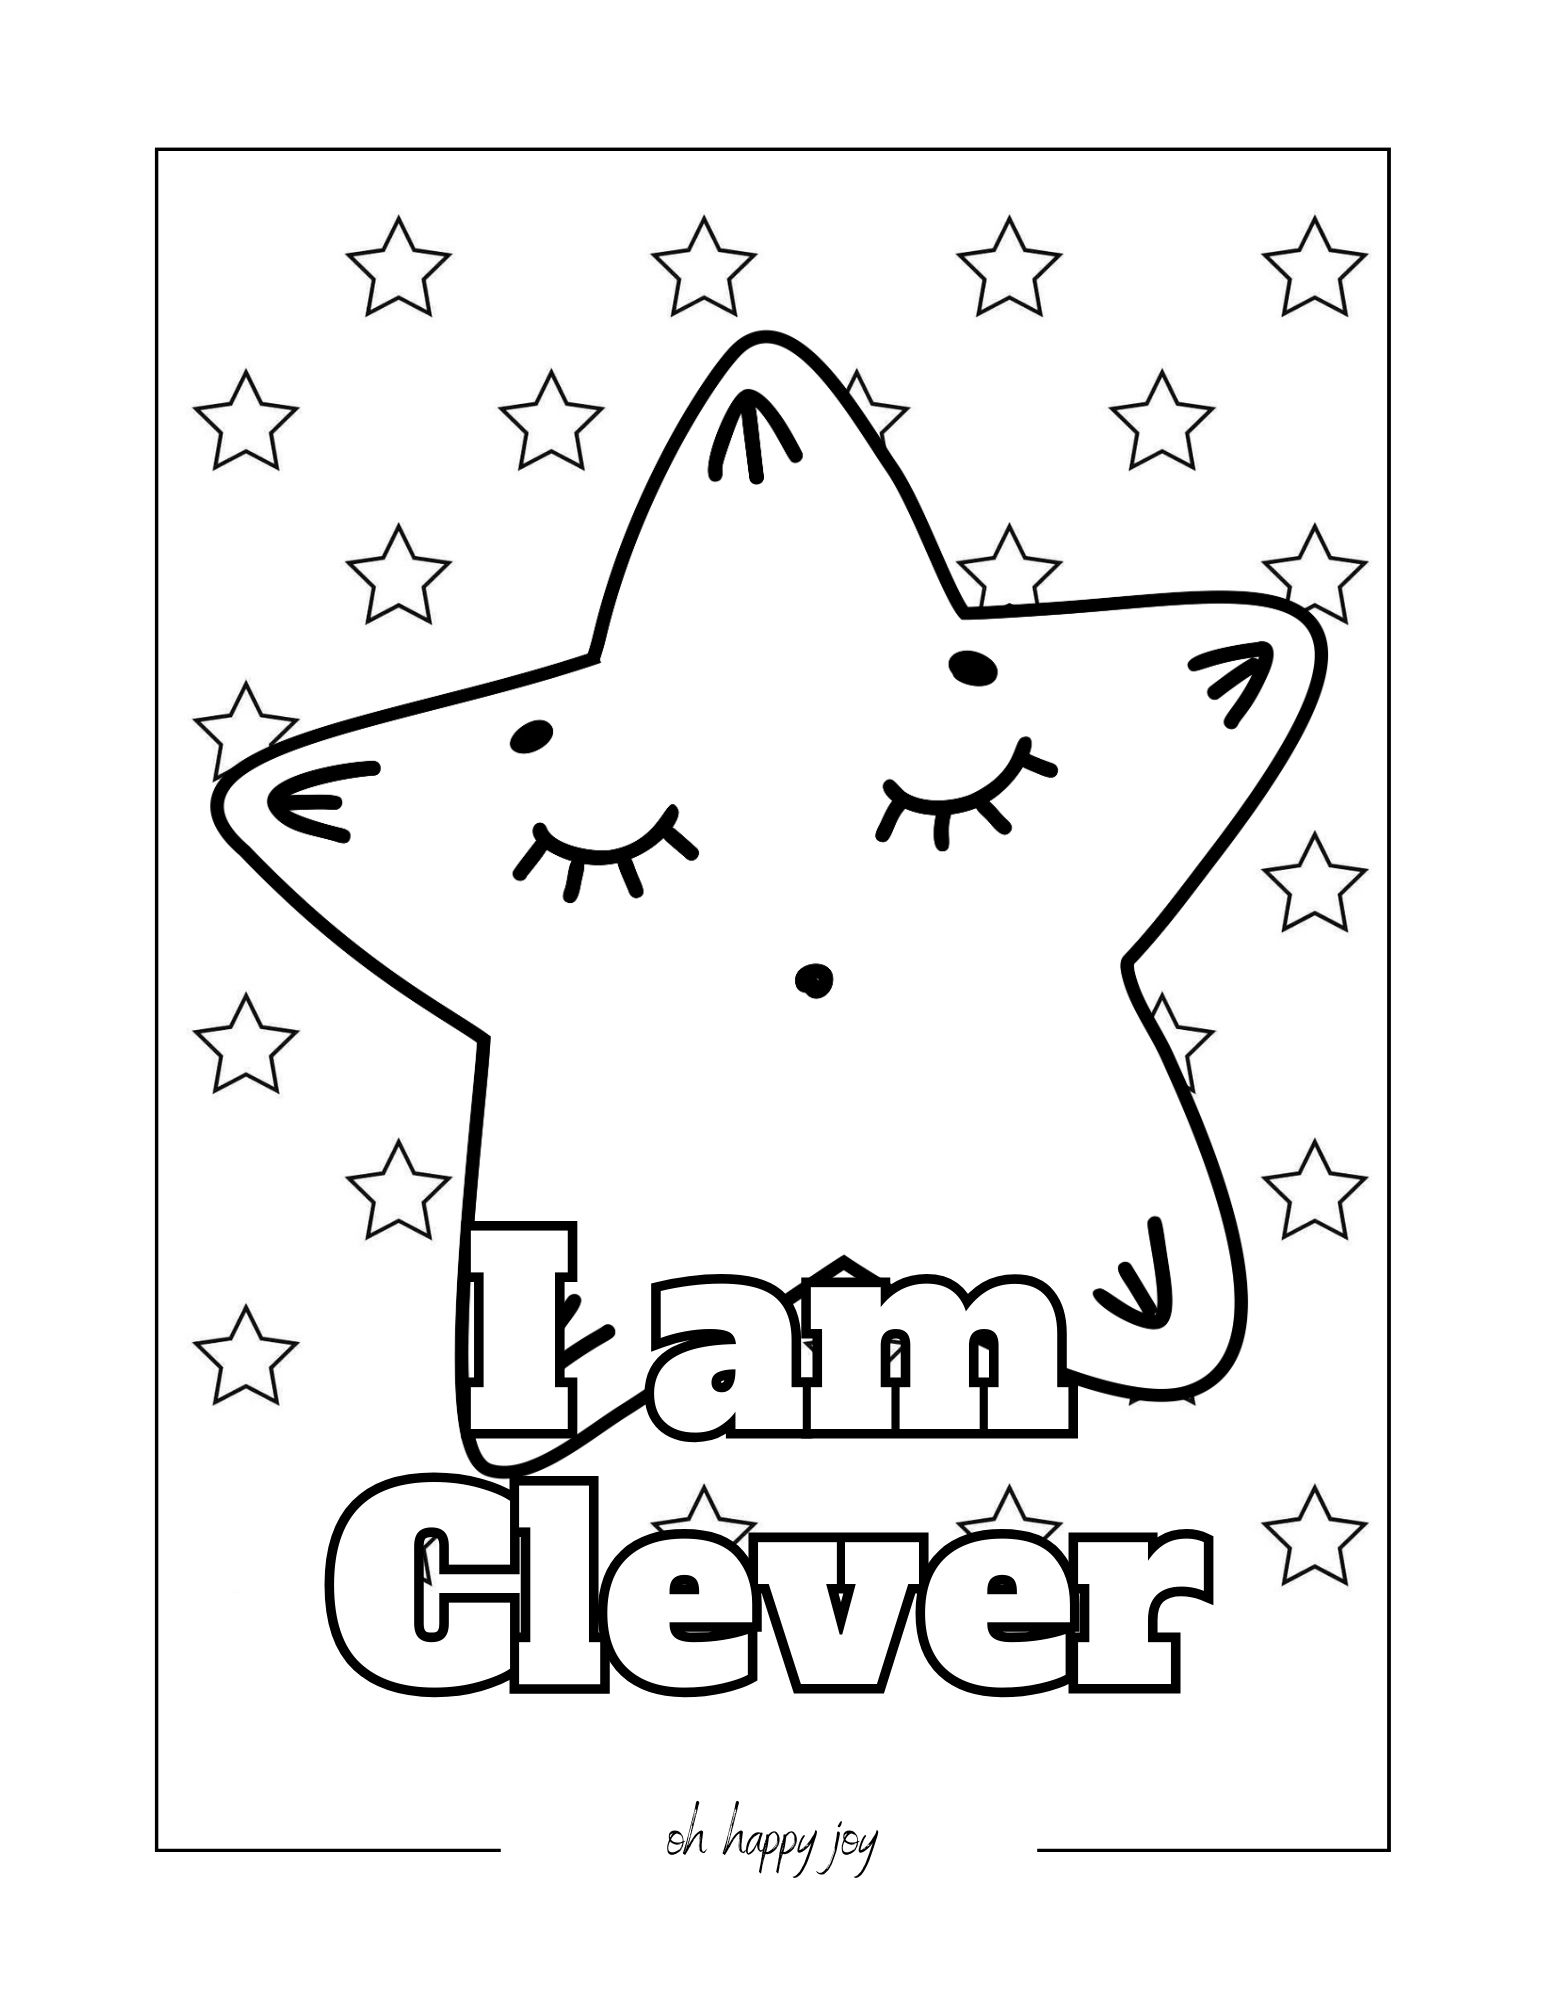 I am clever affirmation coloring page